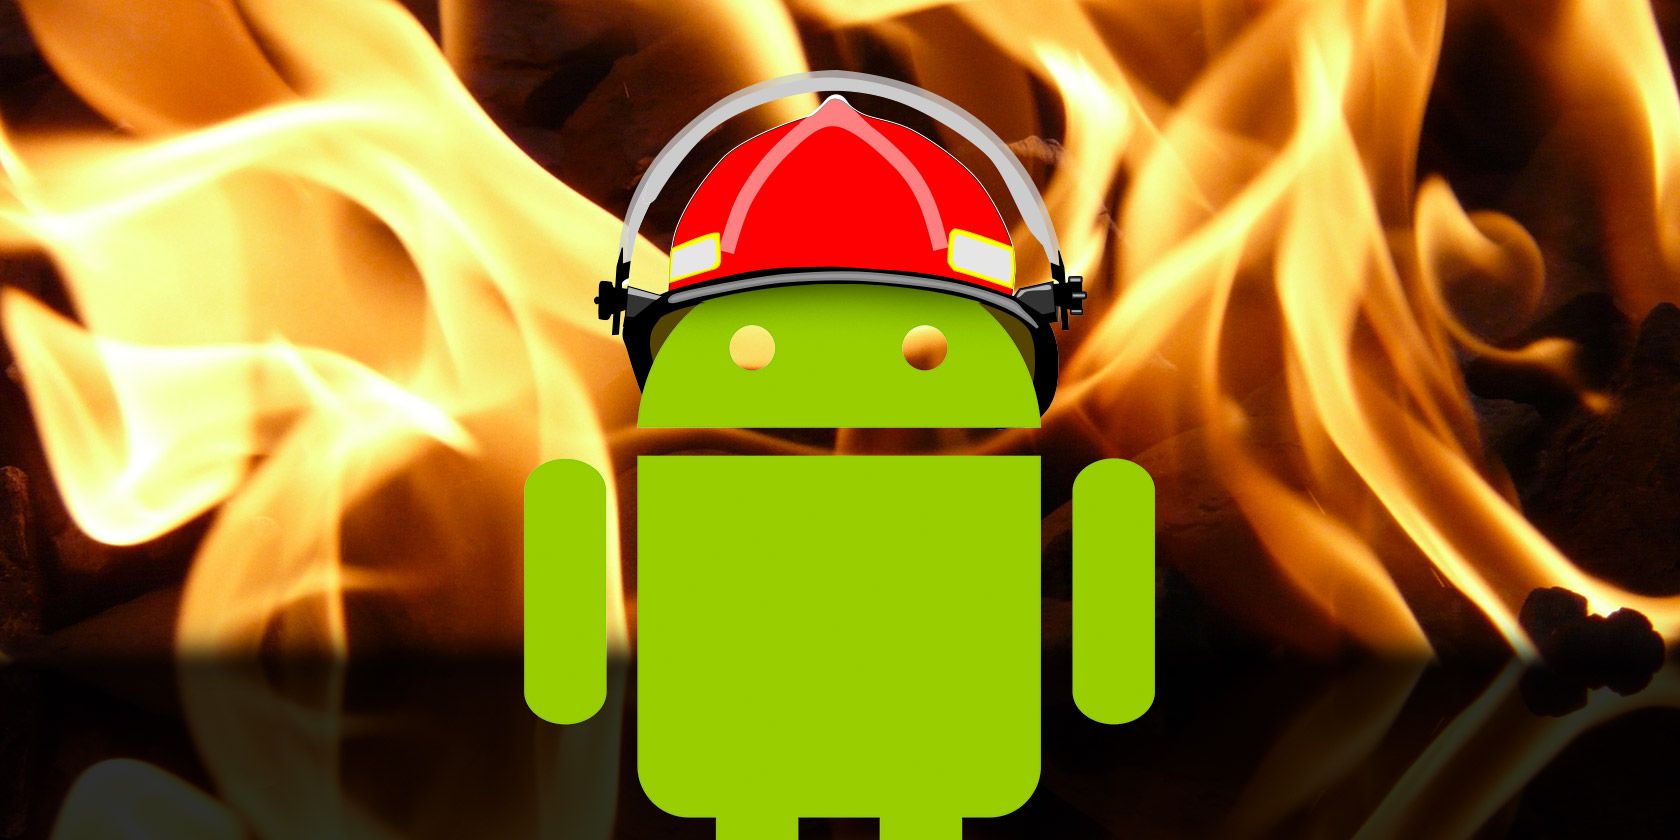 which part of adguard is heating up my android phone